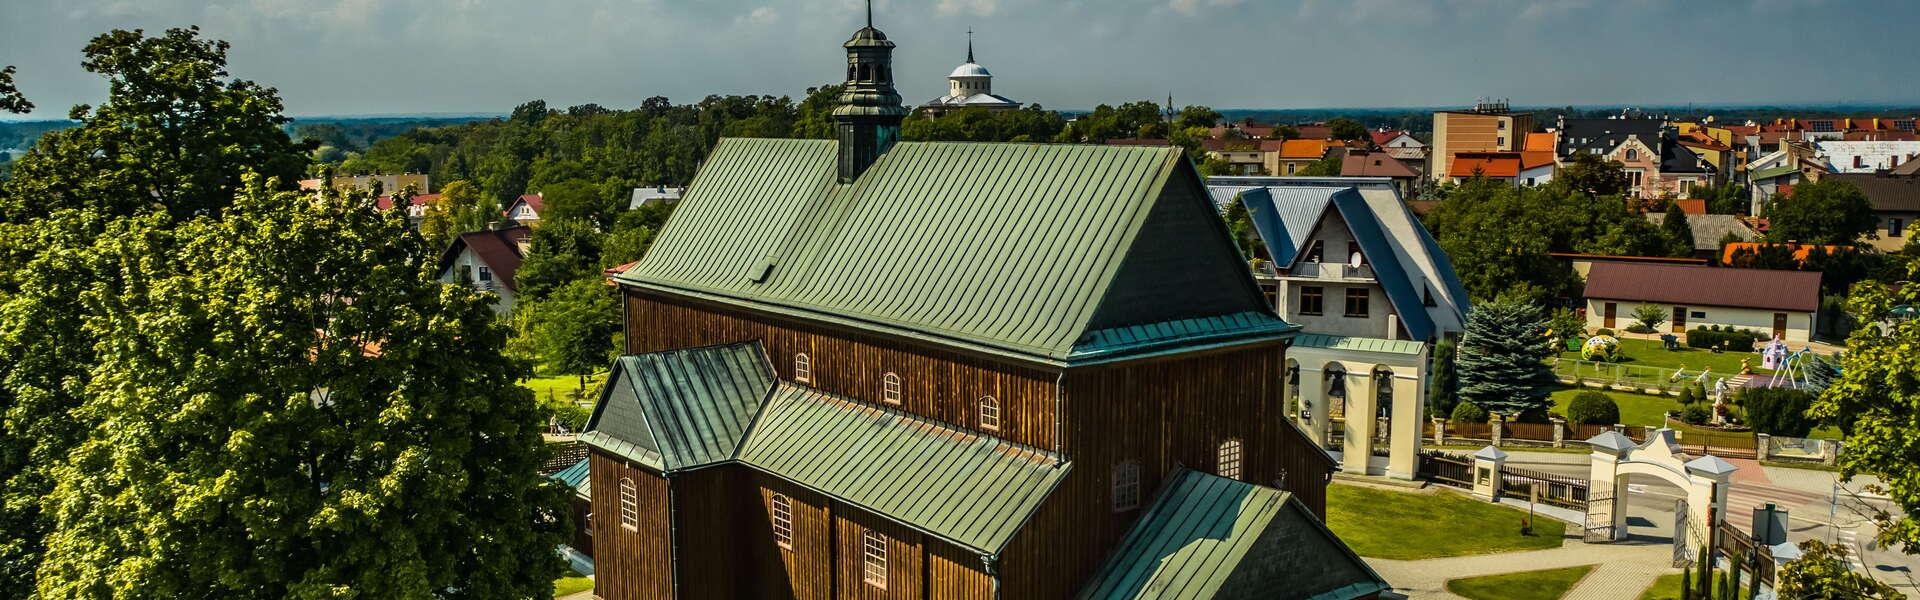 View of the wooden church in Dąbrowa Tarnowska. There are trees around the building. City buildings in the background.